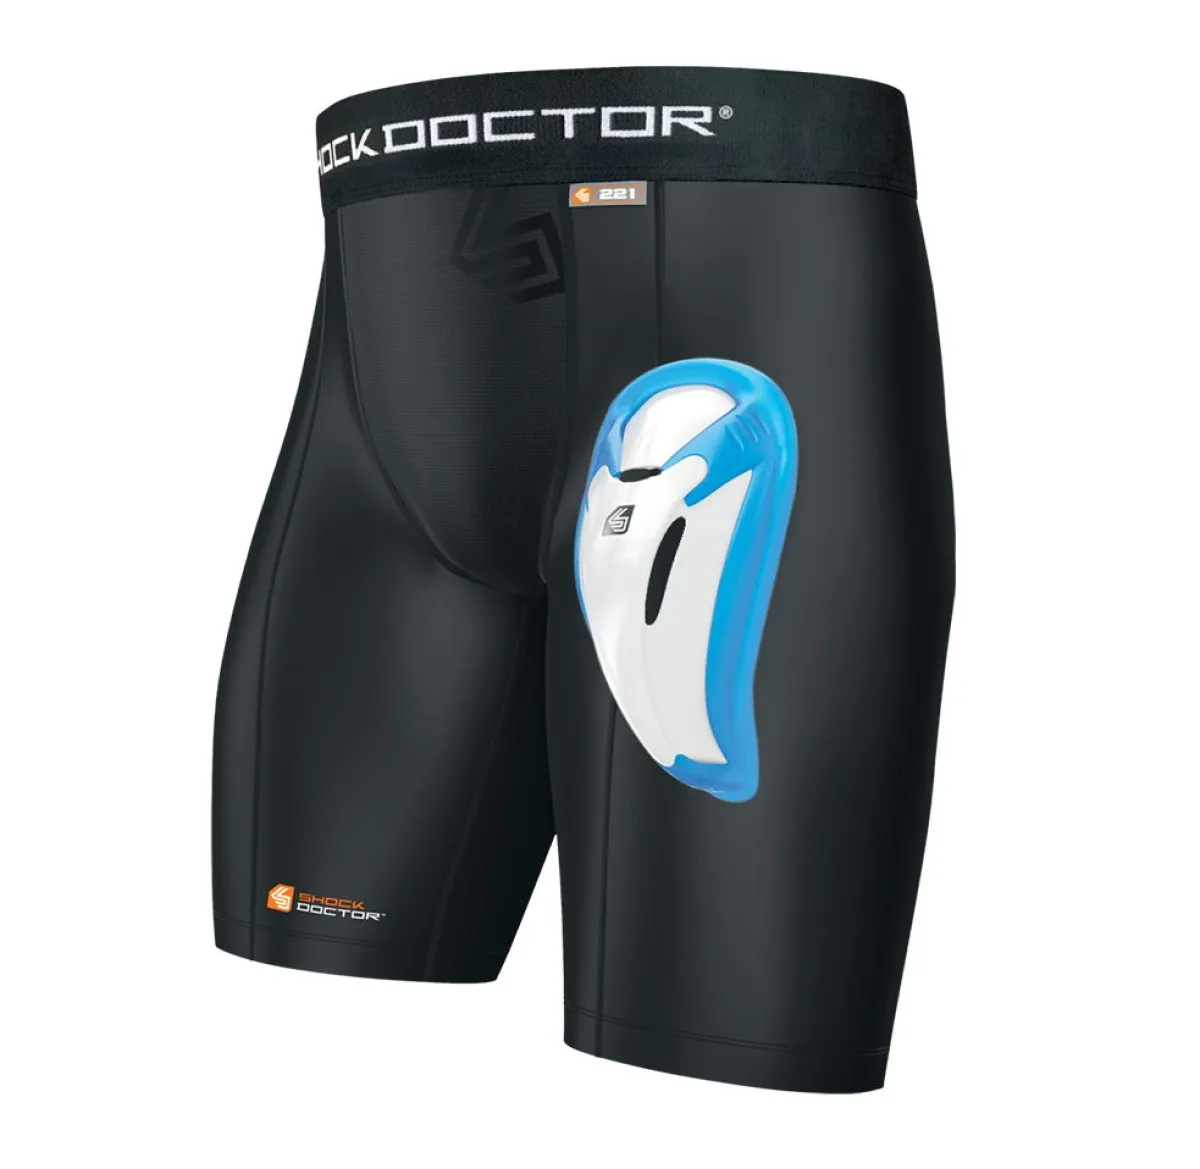 Deep protection compression shorts with Bioflex Cup